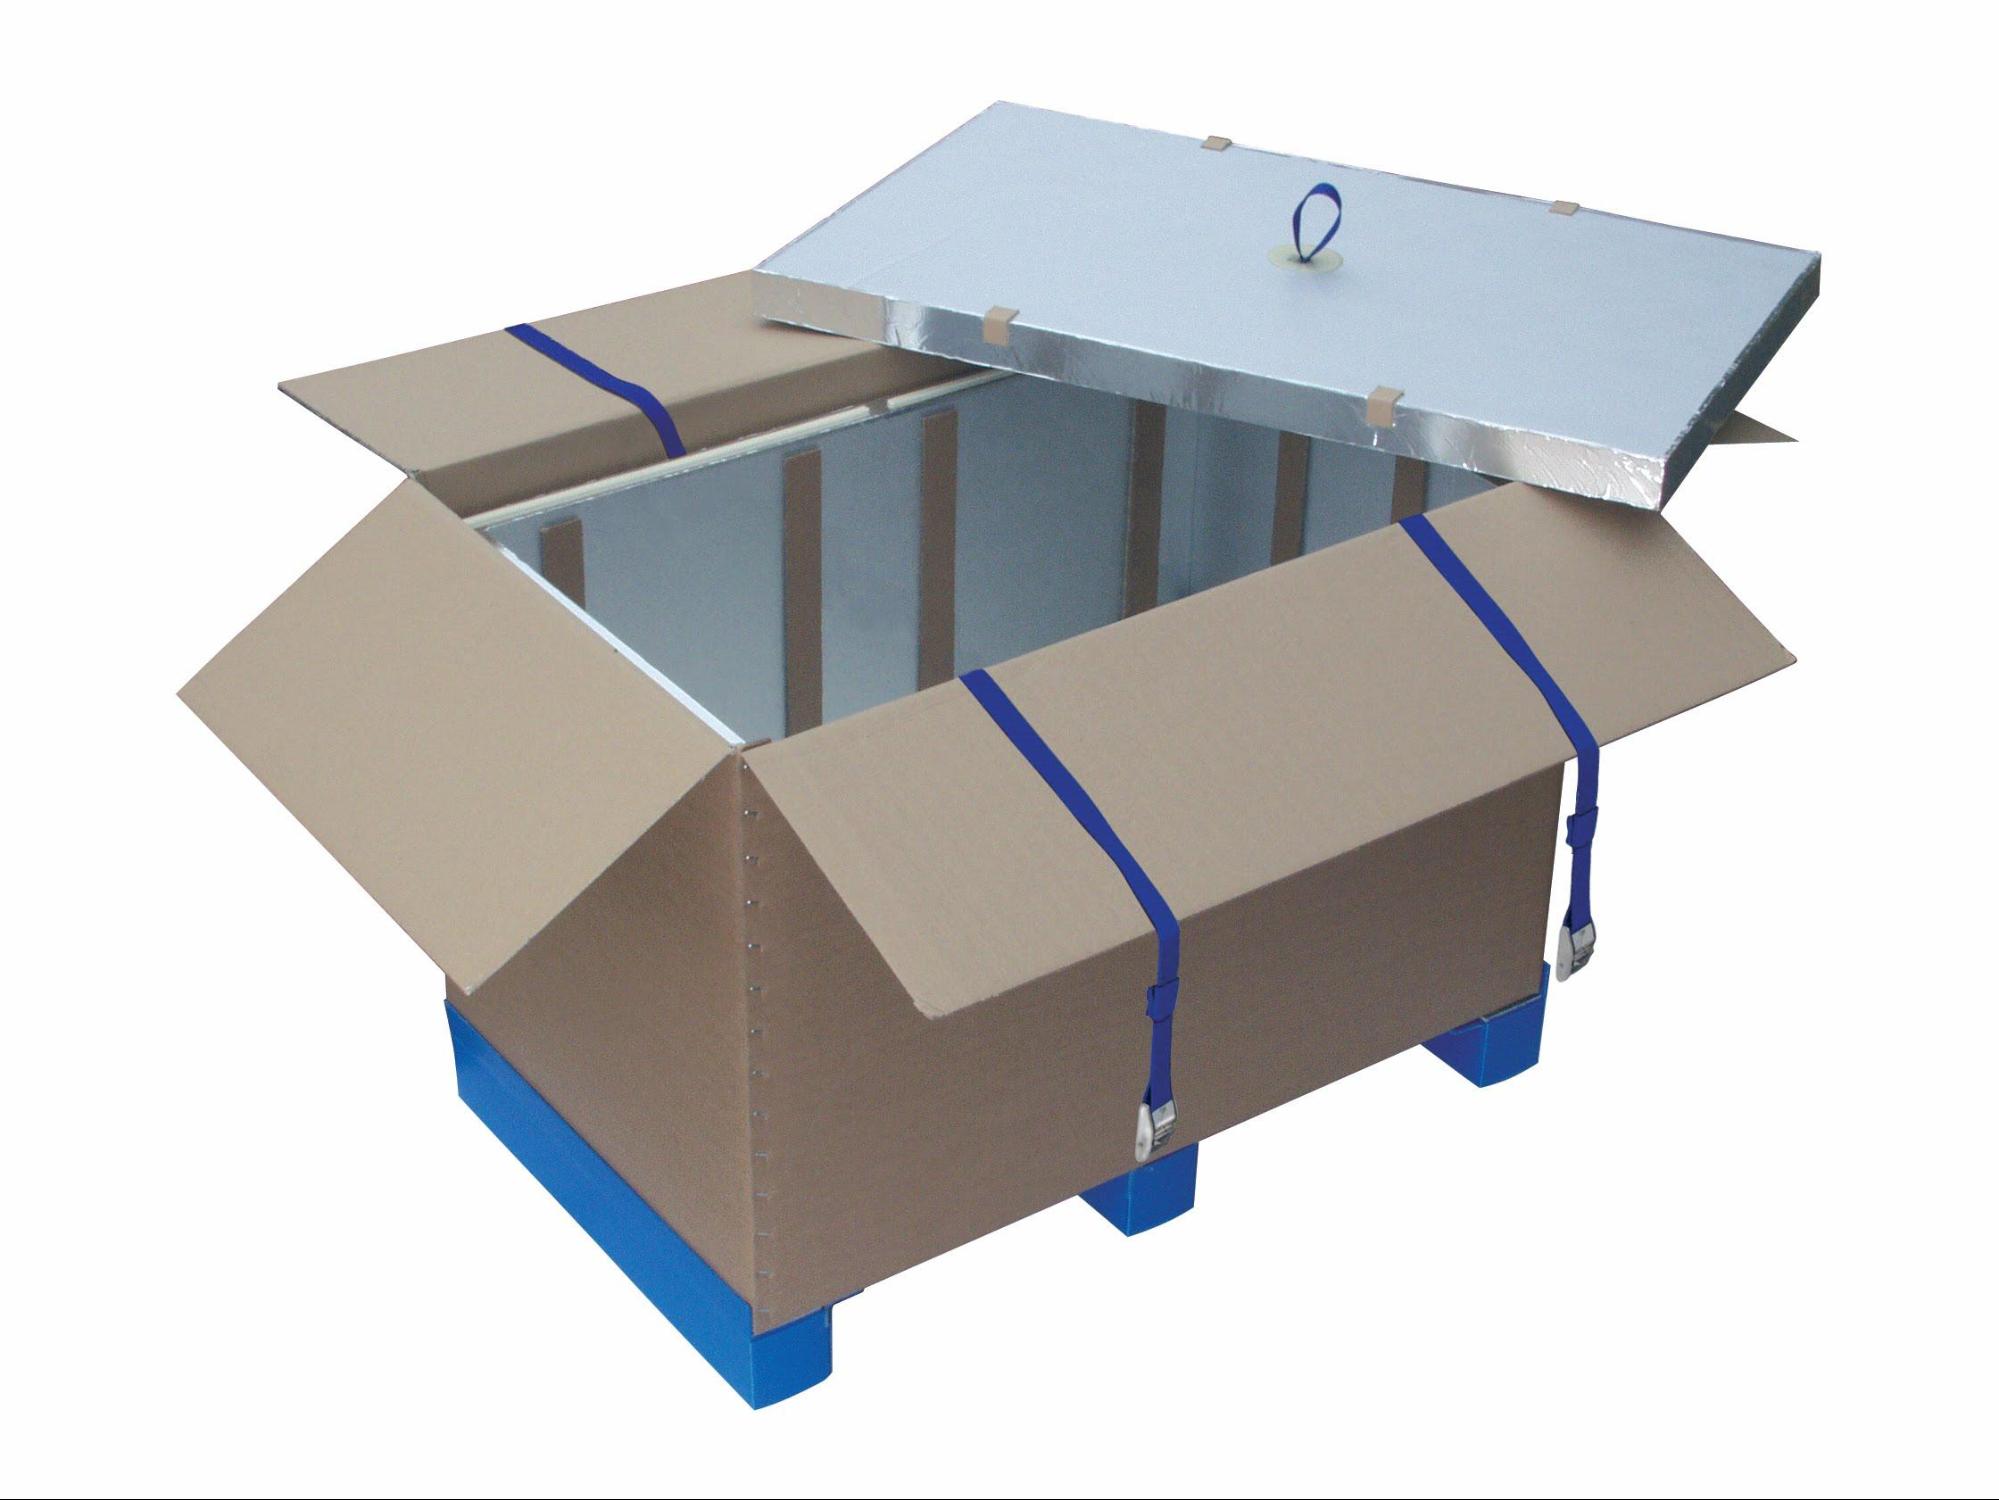 Cold chain thermal shipping container for pharmaceutical products, compliance with the cold chain, transporting medicines